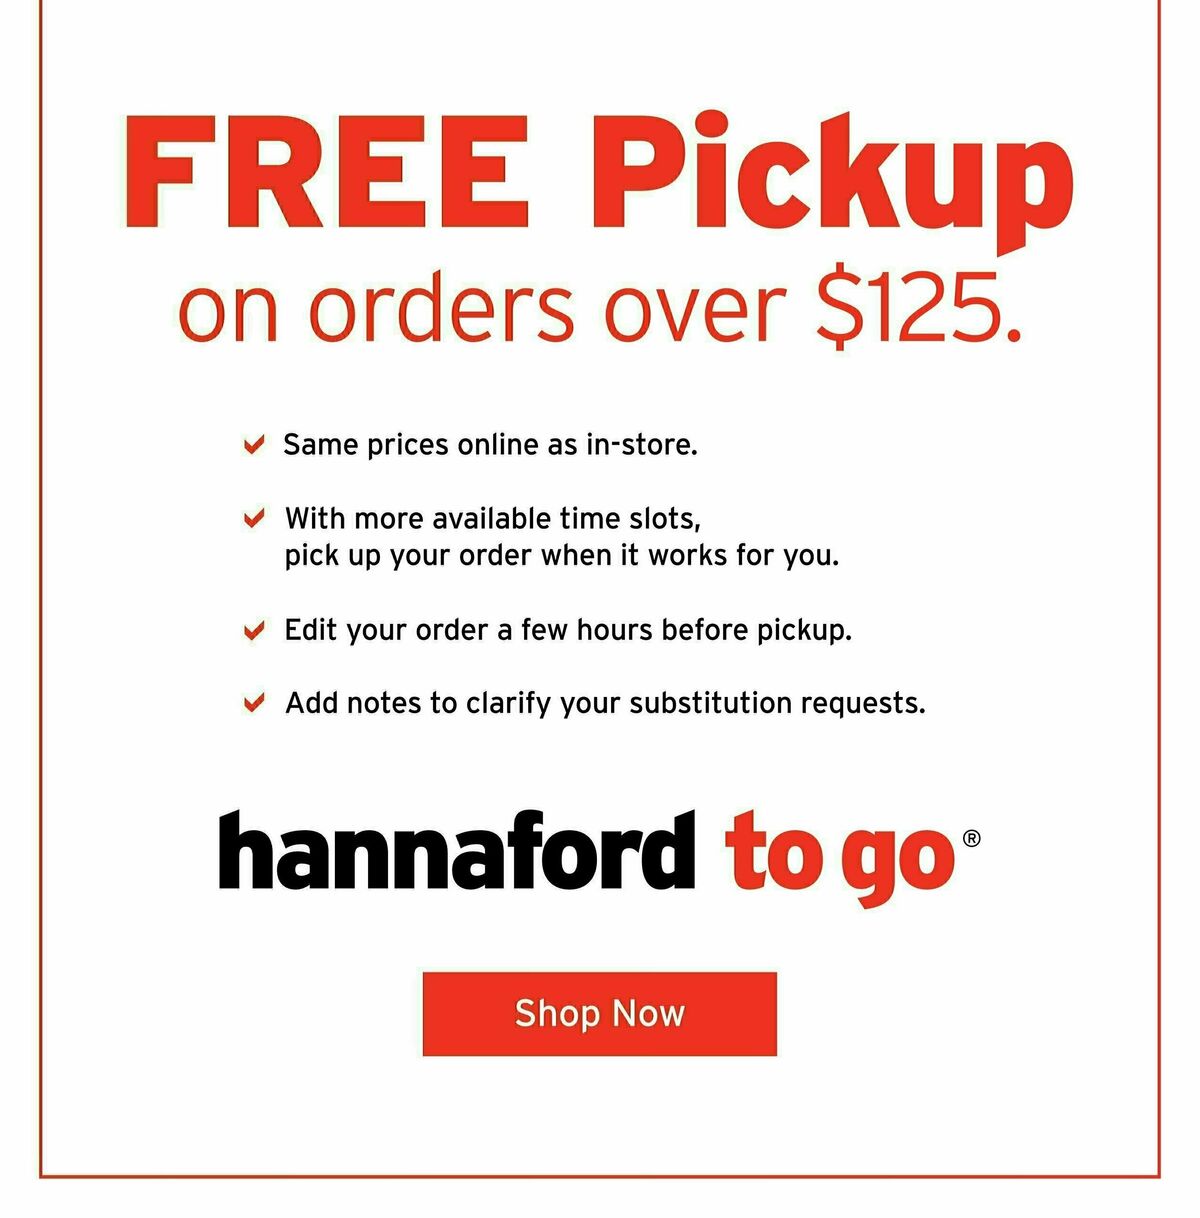 Hannaford Weekly Ad from February 25